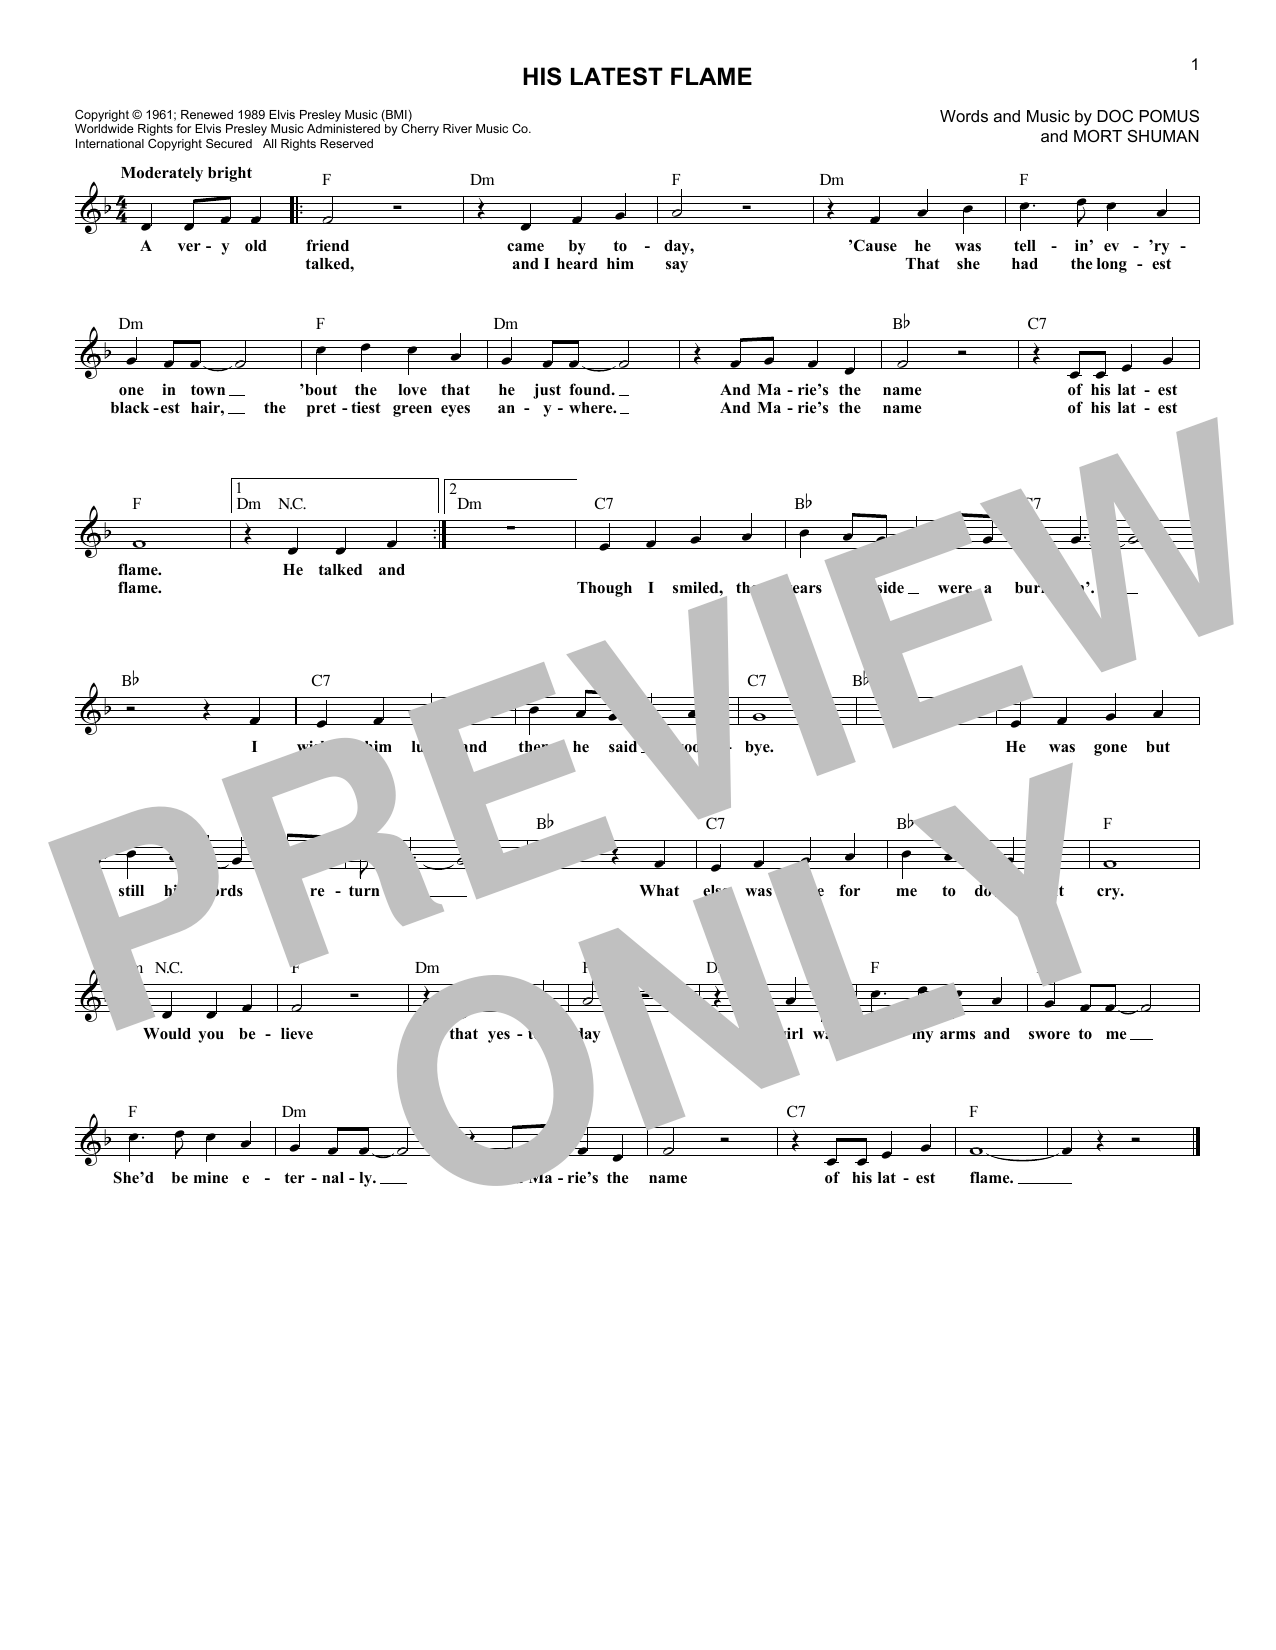 Download Elvis Presley His Latest Flame Sheet Music